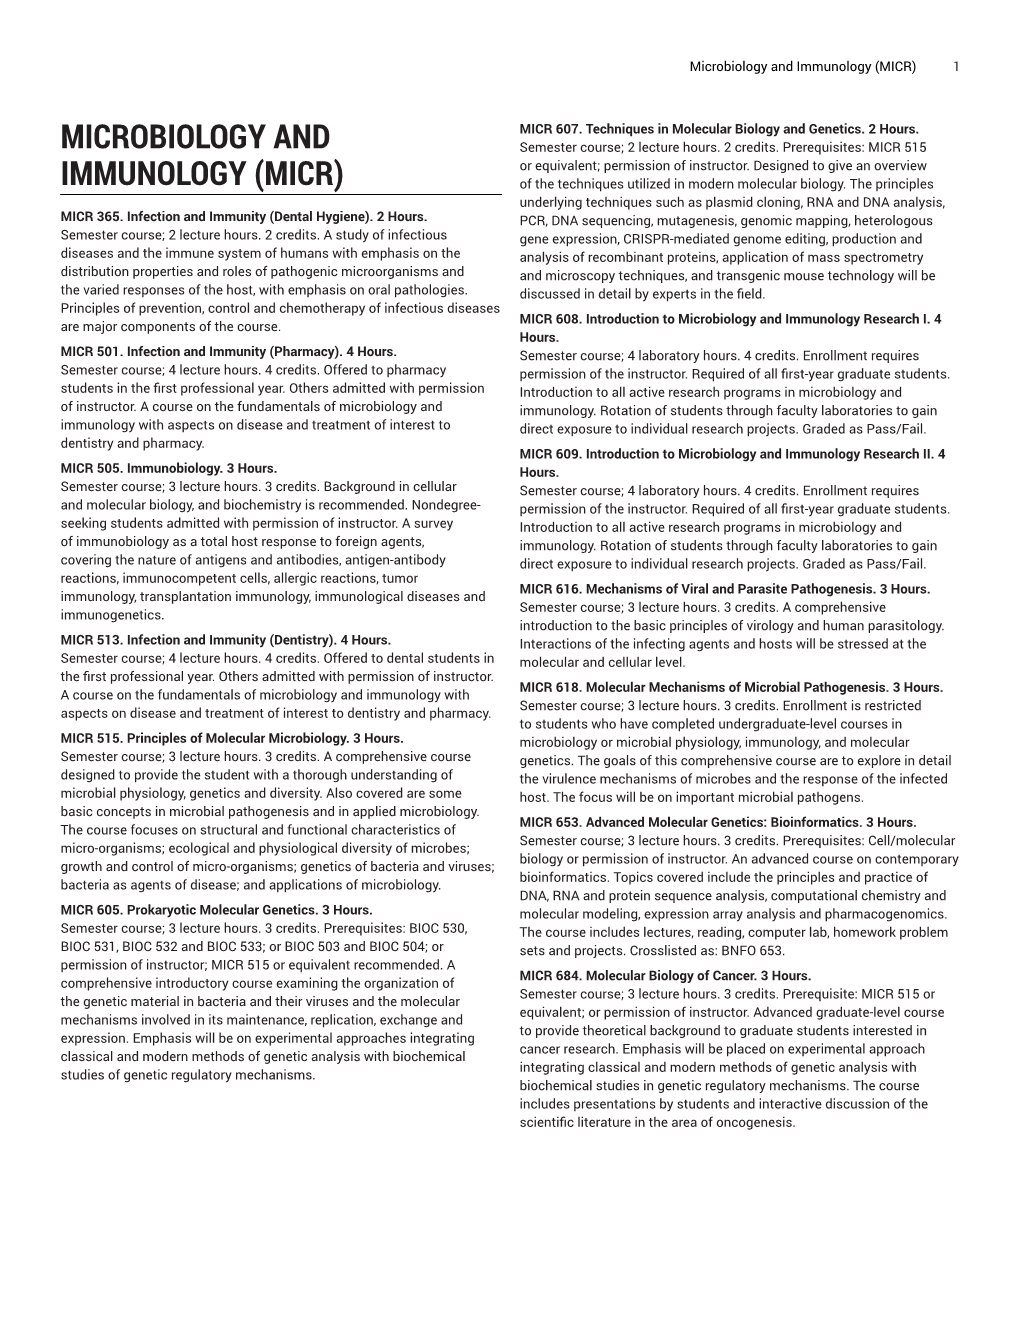 Microbiology and Immunology (MICR) 1